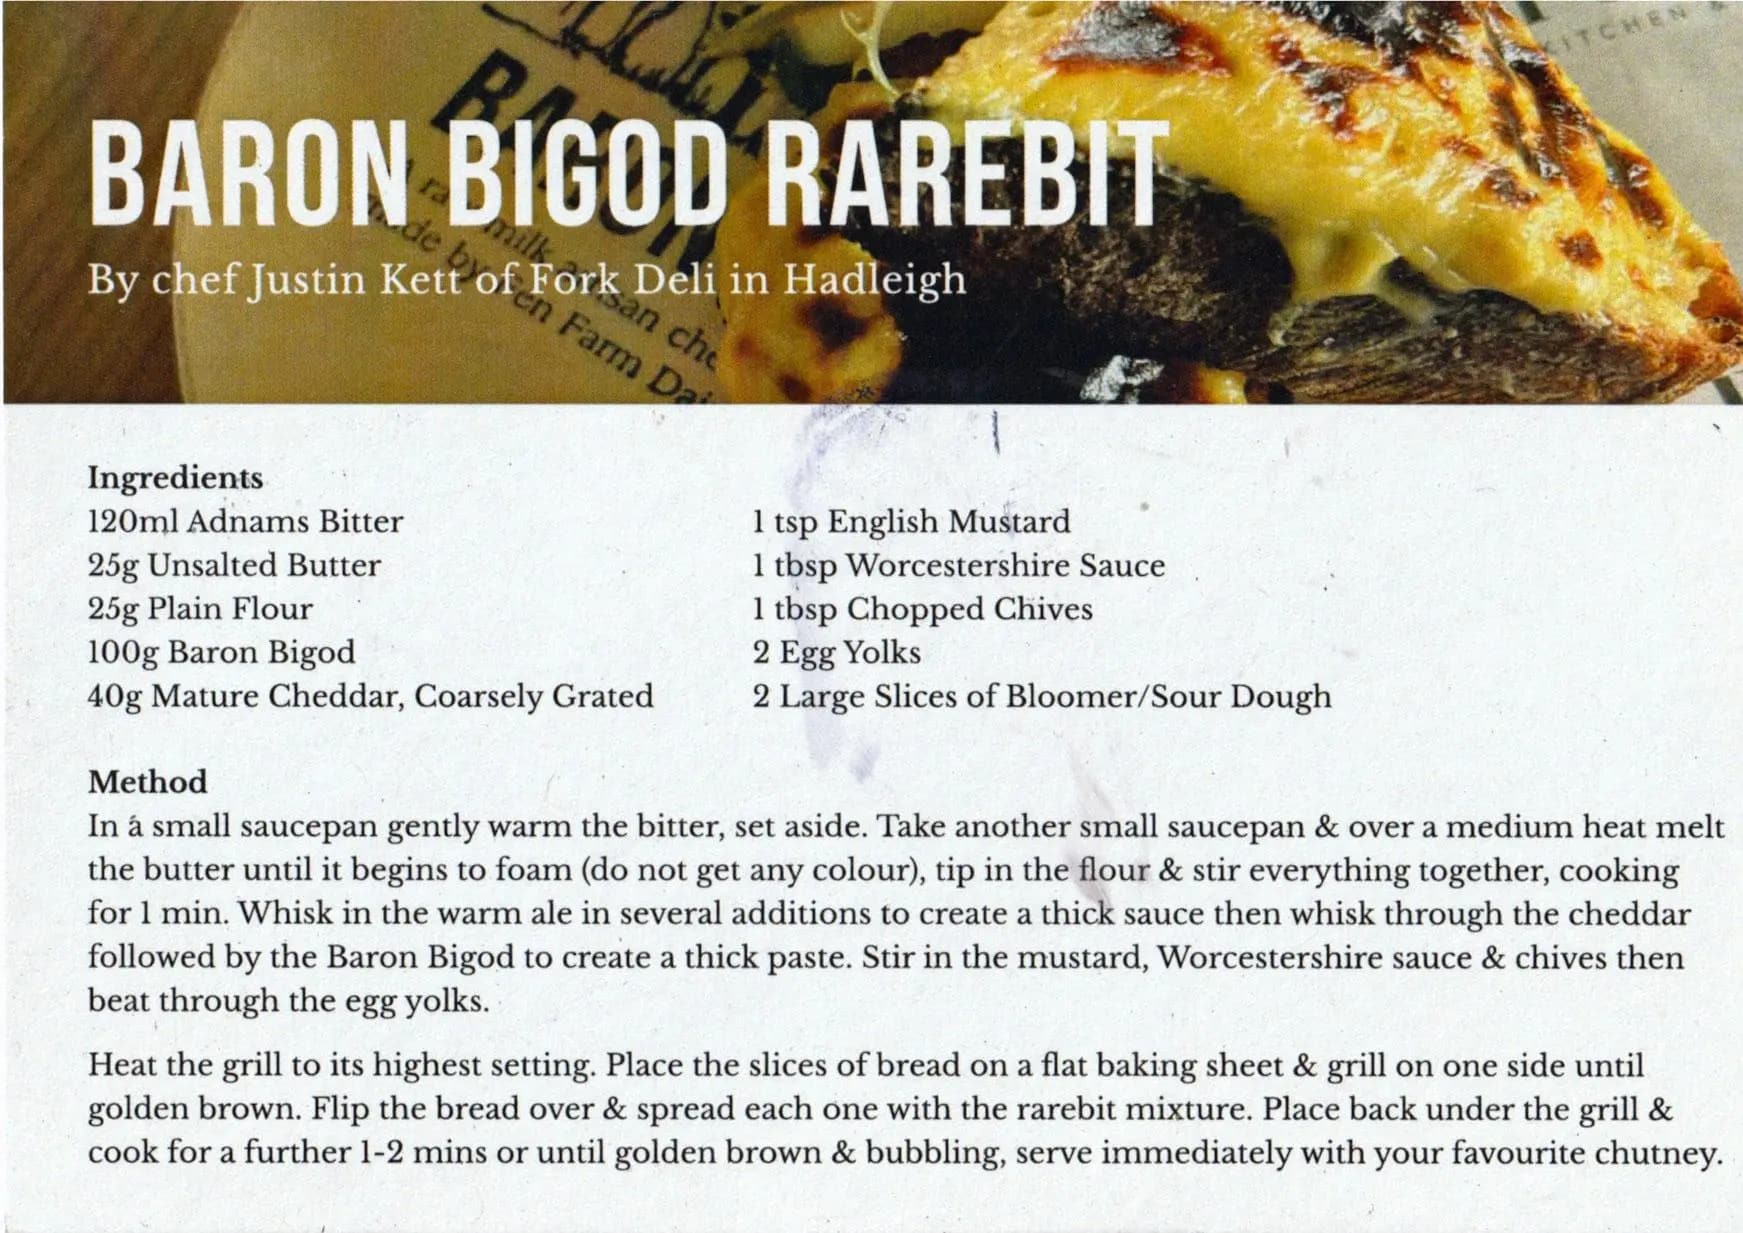 Card with a recipe & ingredients for Welsh Rarebit, showing a lovely, toasted cheese on top of bread. Ingredients: 120ml Adnams Bitter 1 tsp English Mustard 25g Unsalted Butter 1 tbsp Worcestershire Sauce 25g Plain Flour 1 tbsp Chopped Chives 100g Baron Bigod 2 Egg Yolks 40g Mature Cheddar, Coarsely Grated 2 Large Slices of Bloomer/Sour Dough Method In a small saucepan gently warm the bitter, set aside. Take another small saucepan & over a medium heat melt the butter until it begins to foam (do not get any colour), tip in the flour & stir everything together, cooking for 1 min. Whisk in the warm ale in several additions to create a thick sauce then whisk through the cheddar followed by the Baron Bigod to create a thick paste. Stir in the mustard, Worcestershire sauce & chives then beat through the egg yolks. Heat the grill to its highest setting. Place the slices of bread on a flat baking sheet & grill on one side until golden brown. Flip the bread over & spread each one with the rarebit mixture. Place back under the grill & cook for a further 1-2 mins or until golden brown & bubbling, serve immediately with your favourite chutney.